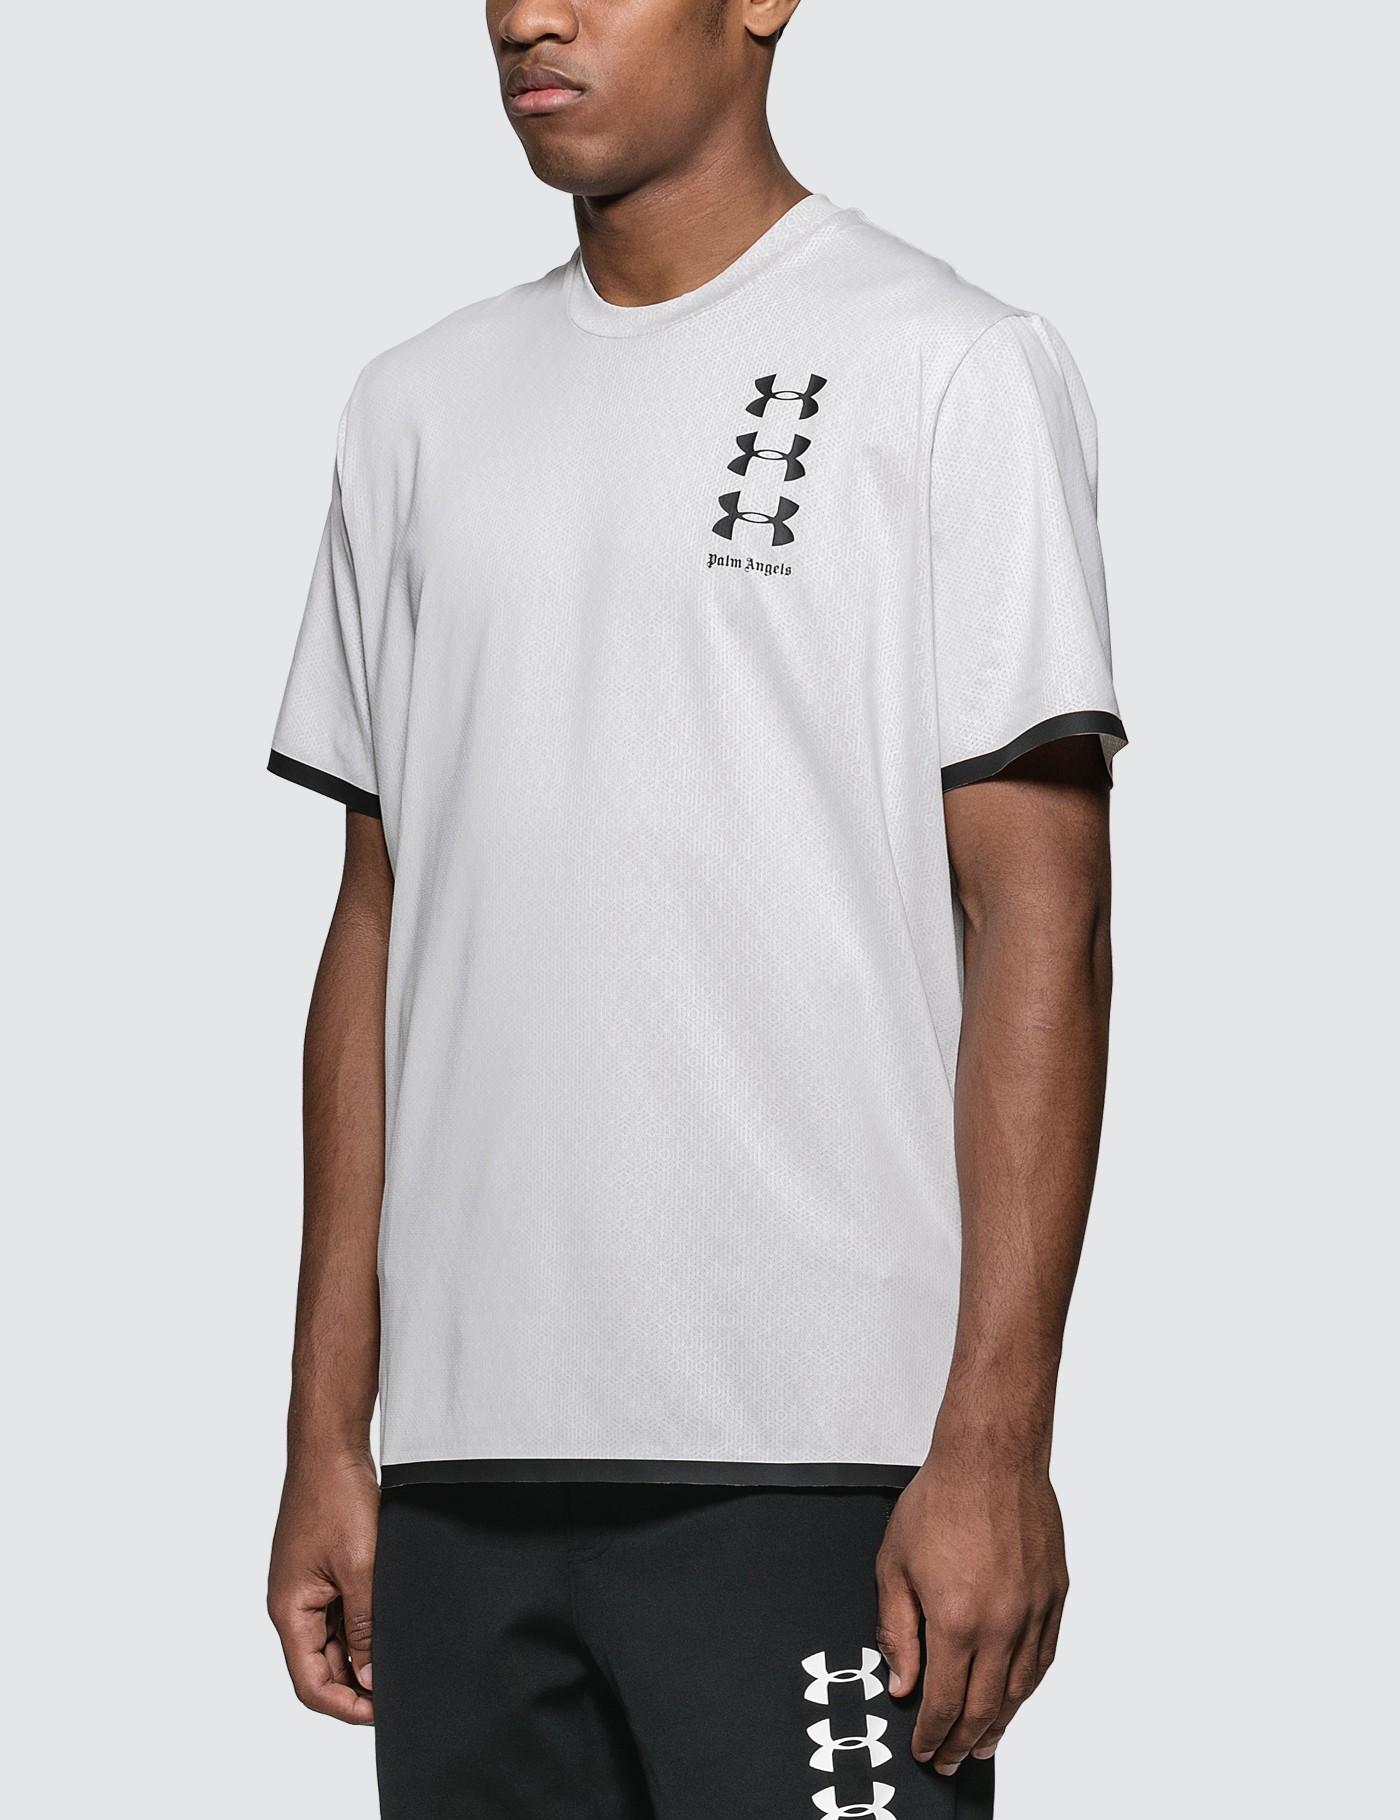 under armour t shirts